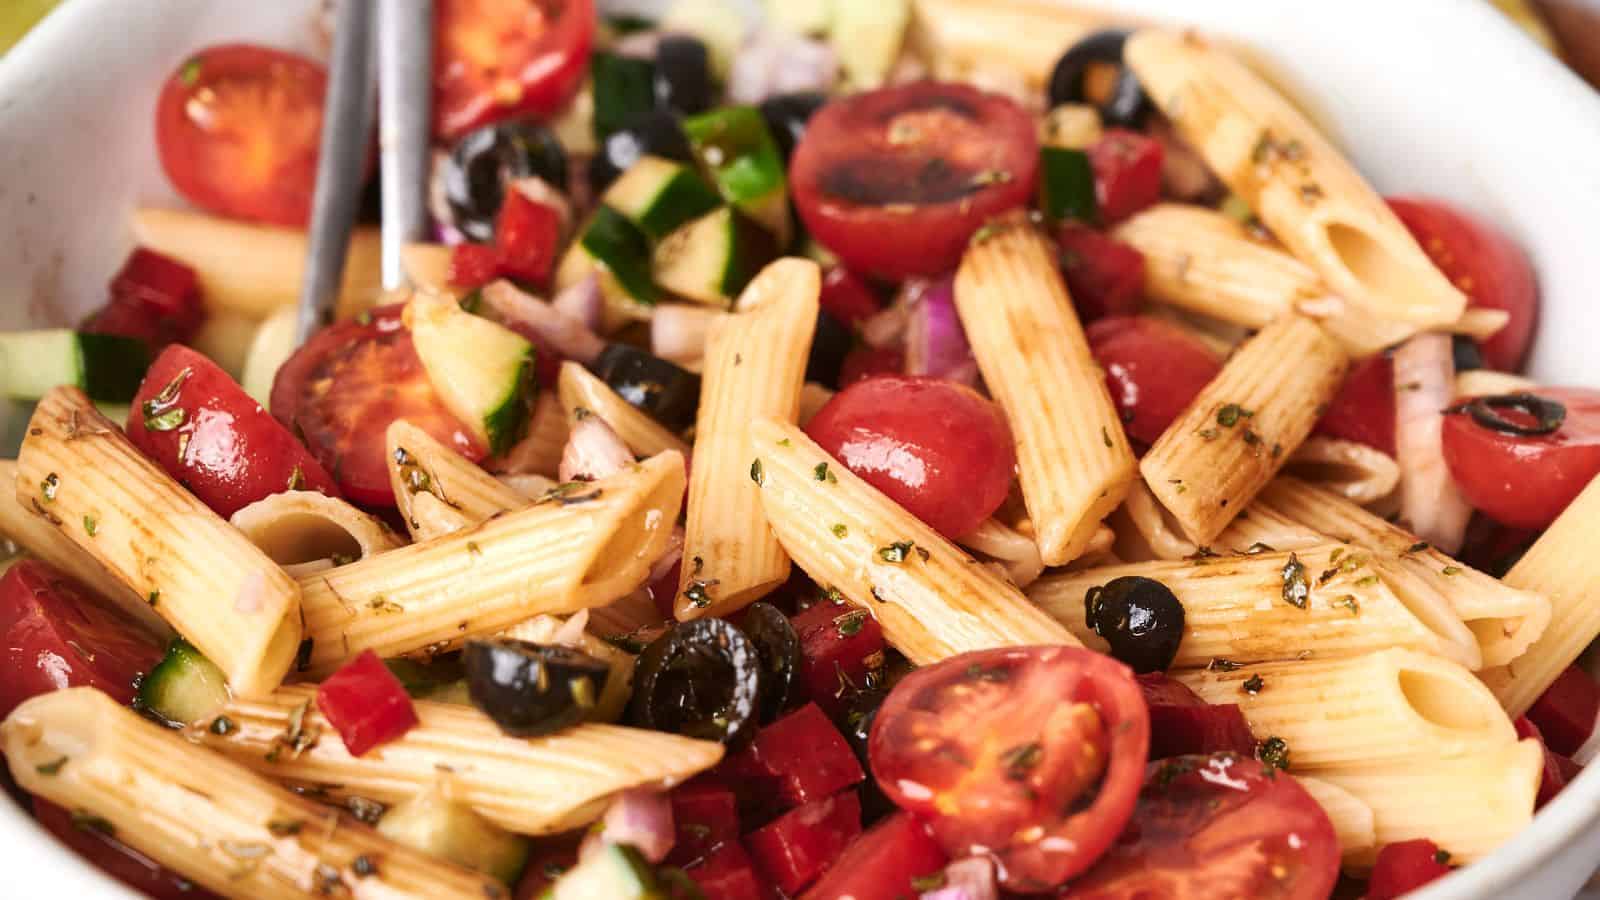 A bowl of vibrant pasta salad with penne, cherry tomatoes, black olives, diced cucumbers, red onions, and a drizzle of dressing.